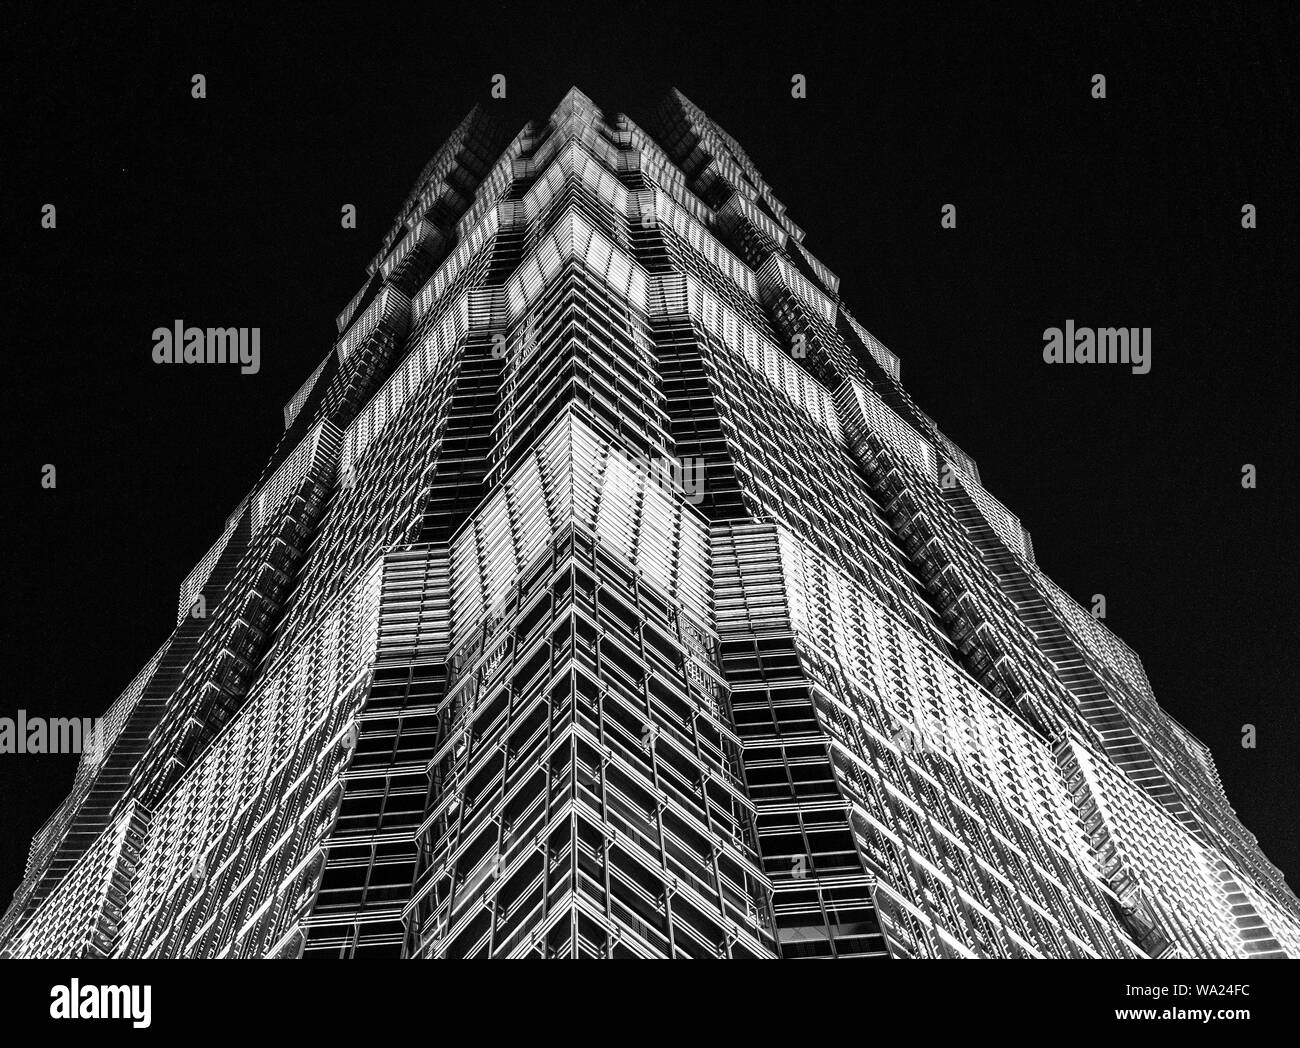 Black and white abstract geometric minimalism in architecture with the Jin Mao Tower skyscraper of Shanghai, China. Symmetry in Asymmetry. Stock Photo